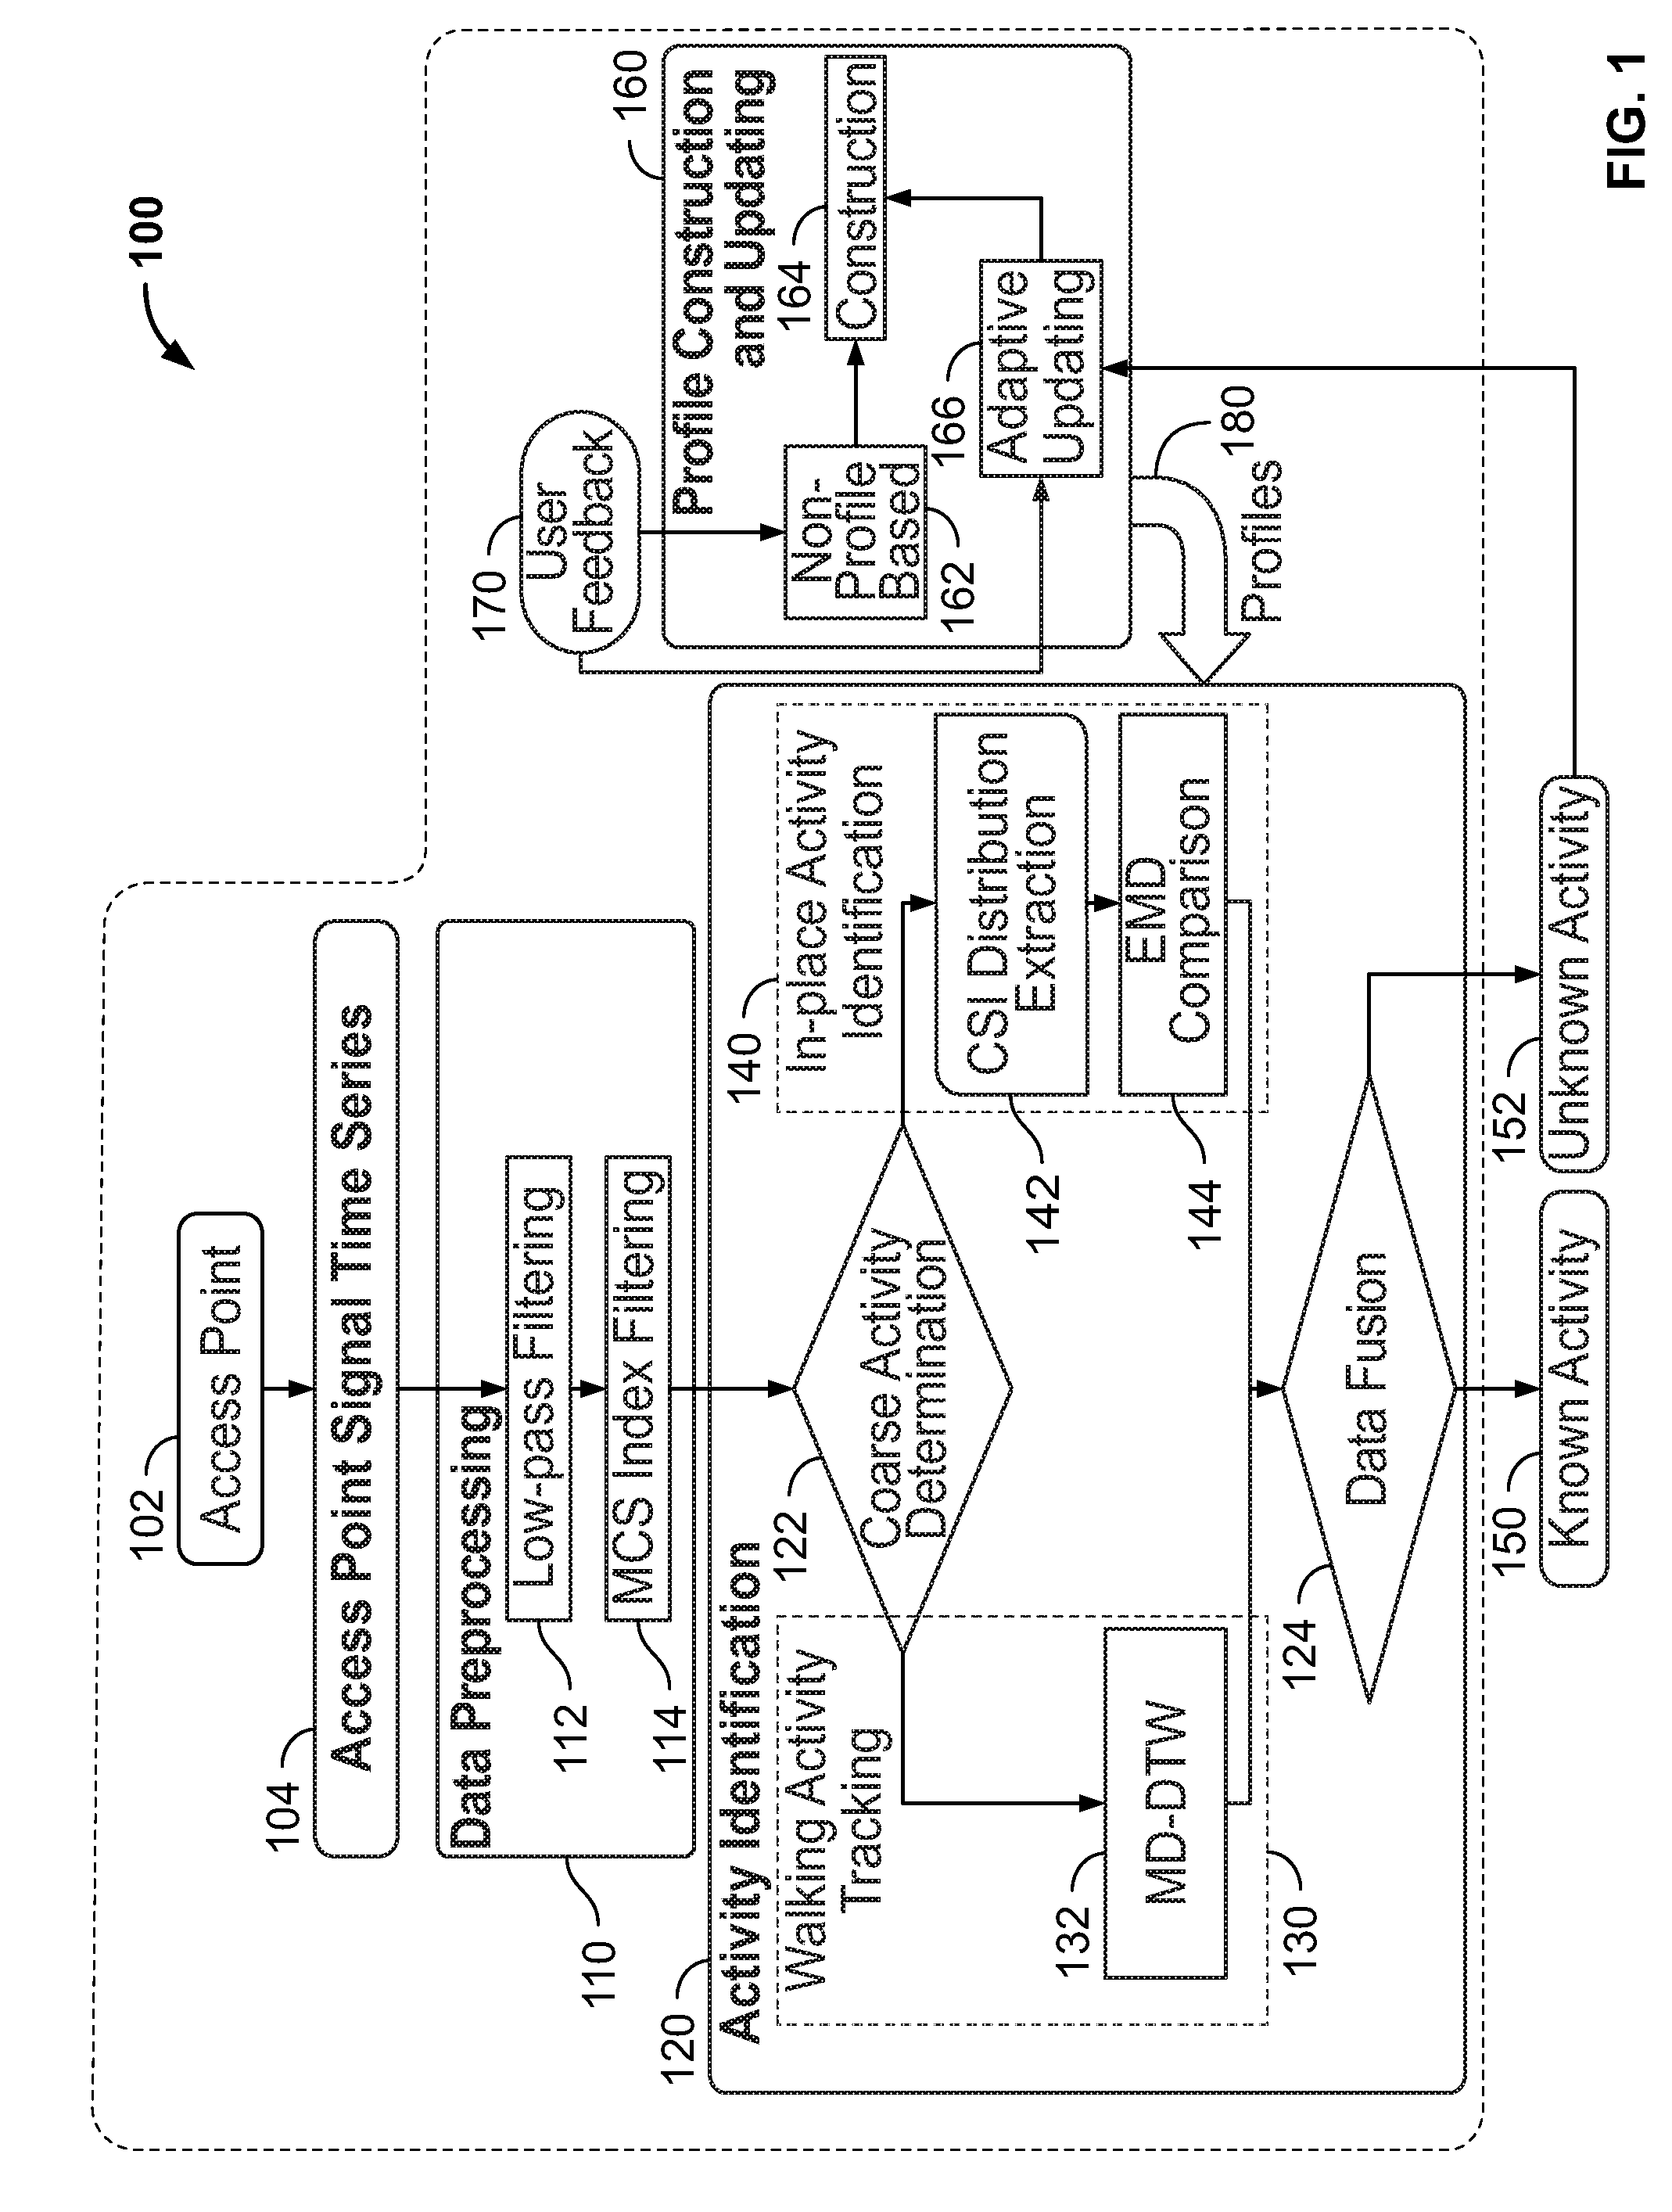 Device-free activity identification using fine-grained WIFI signatures